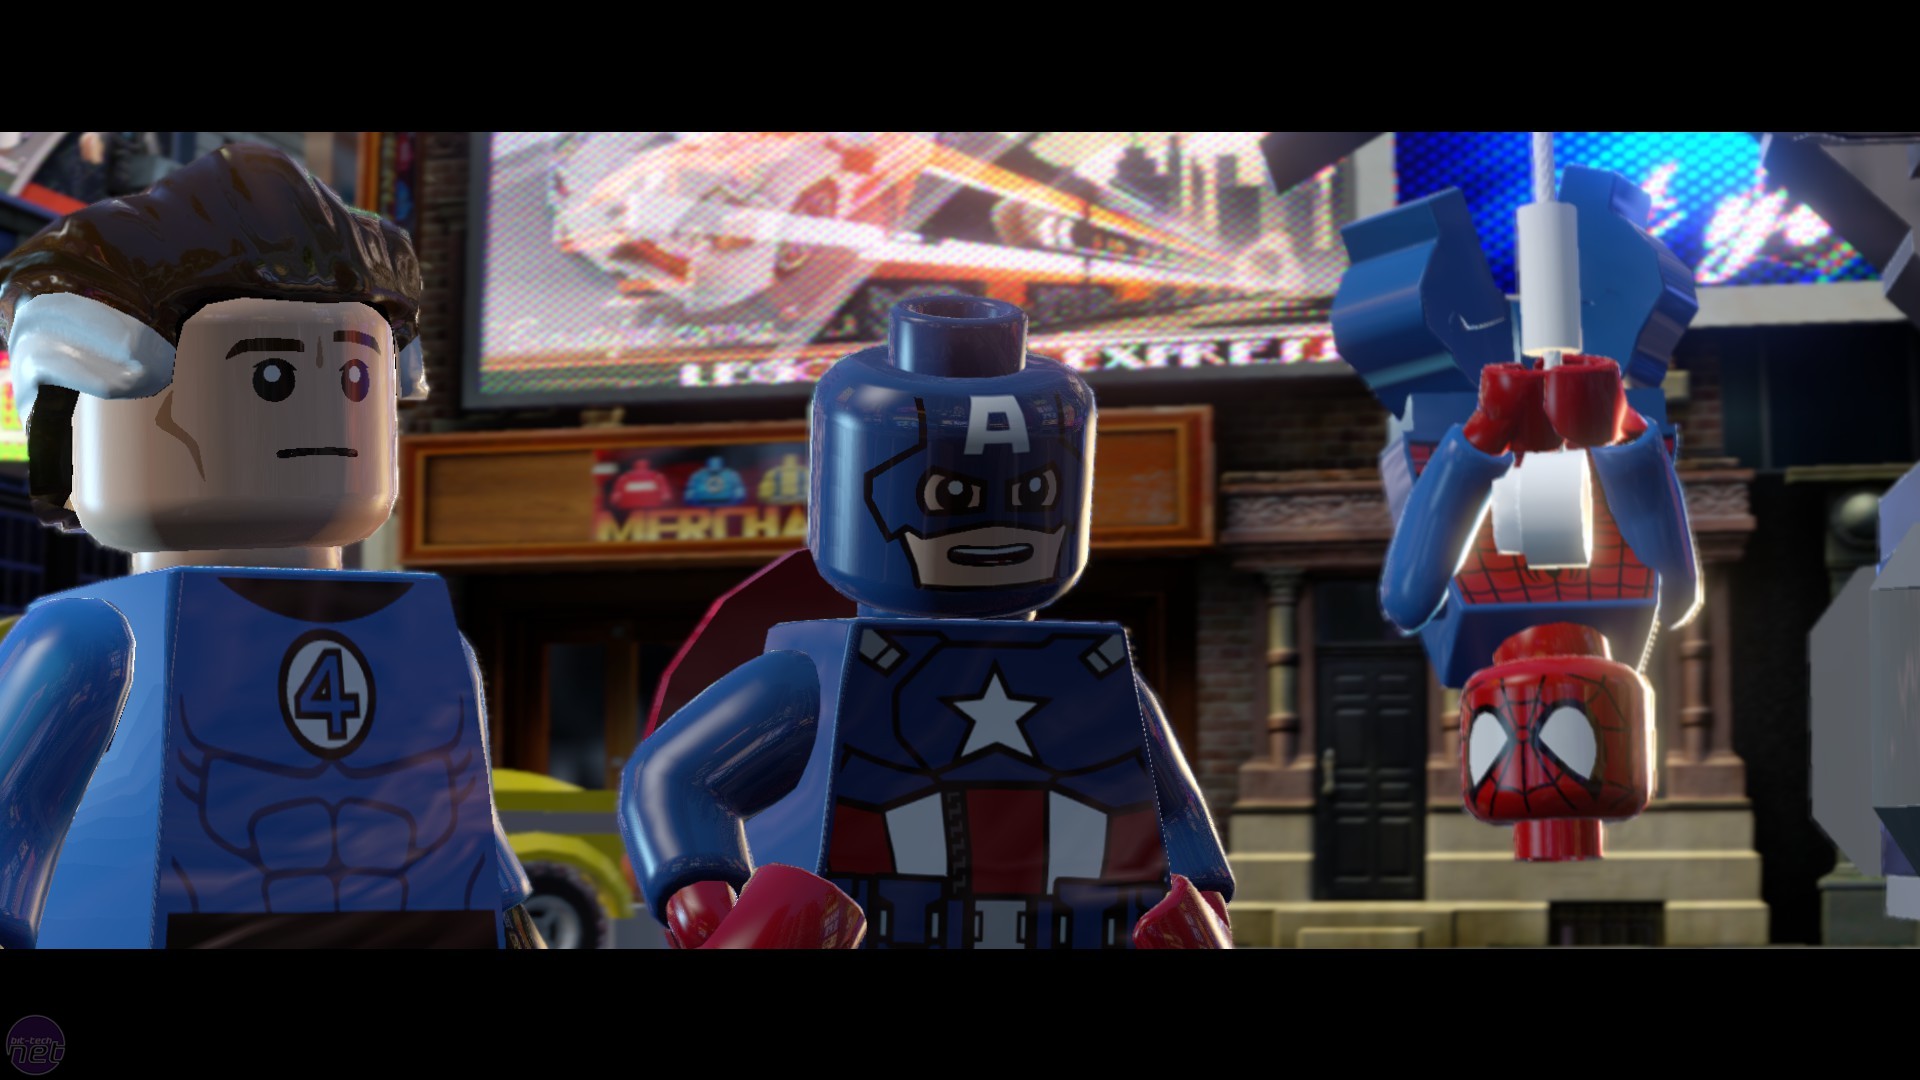 Lego Marvel Superheroes Review: PS4's Best Game for Kids